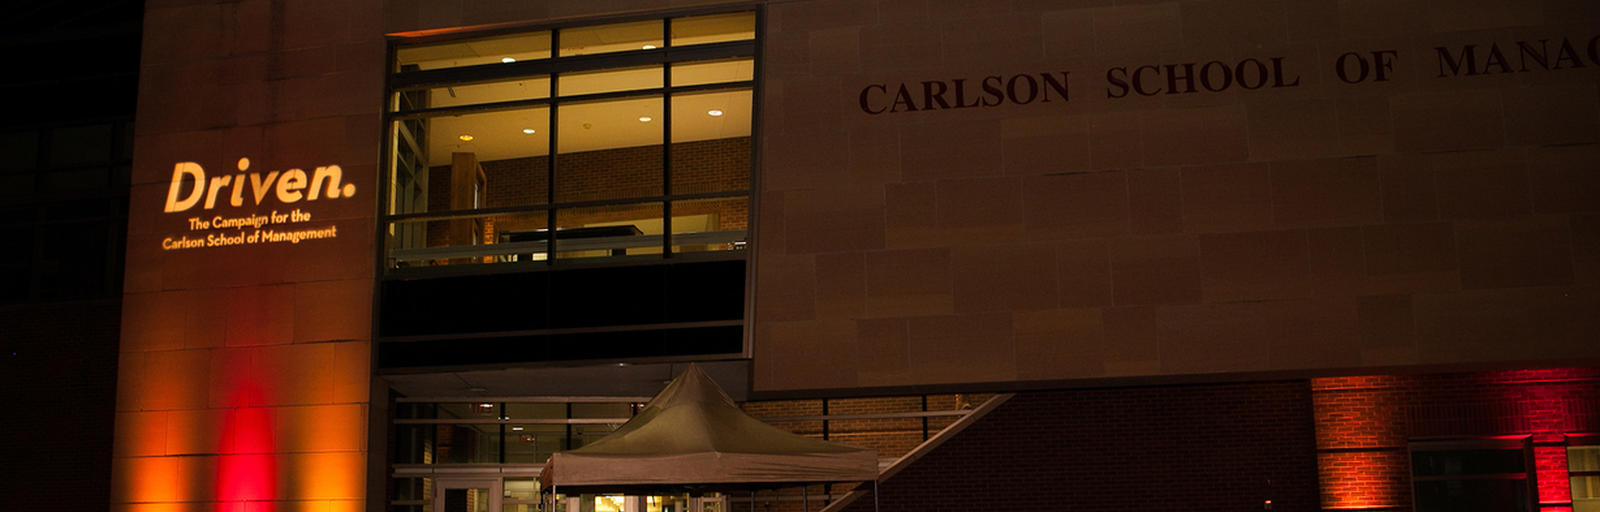 Exterior image of the Carlson School of Management at night with maroon and gold up lights.